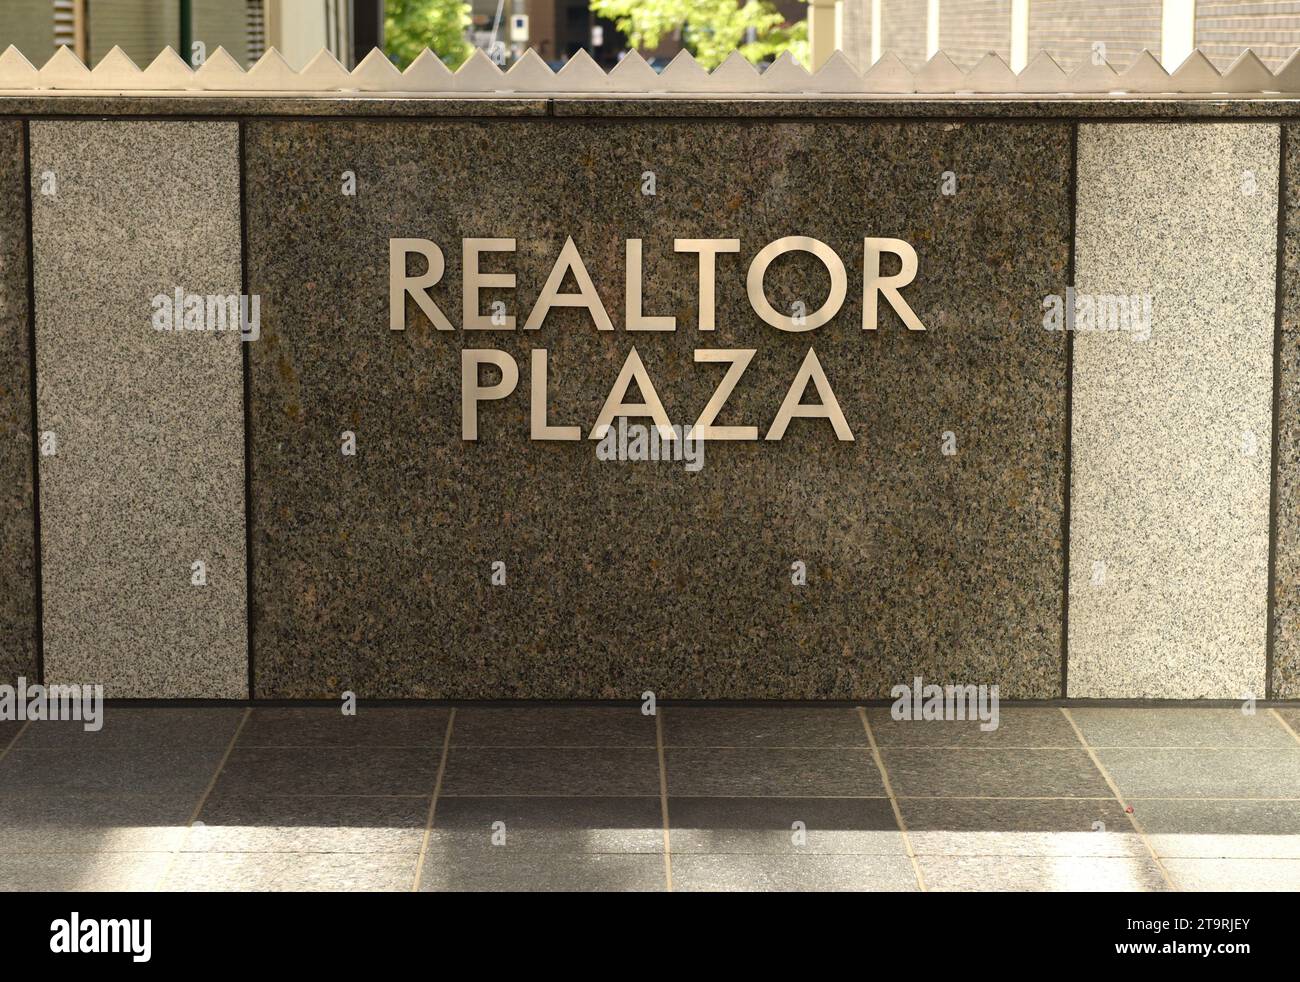 Chicago, USA - June 04, 2018: Realtor Plaza sign near Chicago Association of Realtors on Michigan Ave in Chicago. Stock Photo